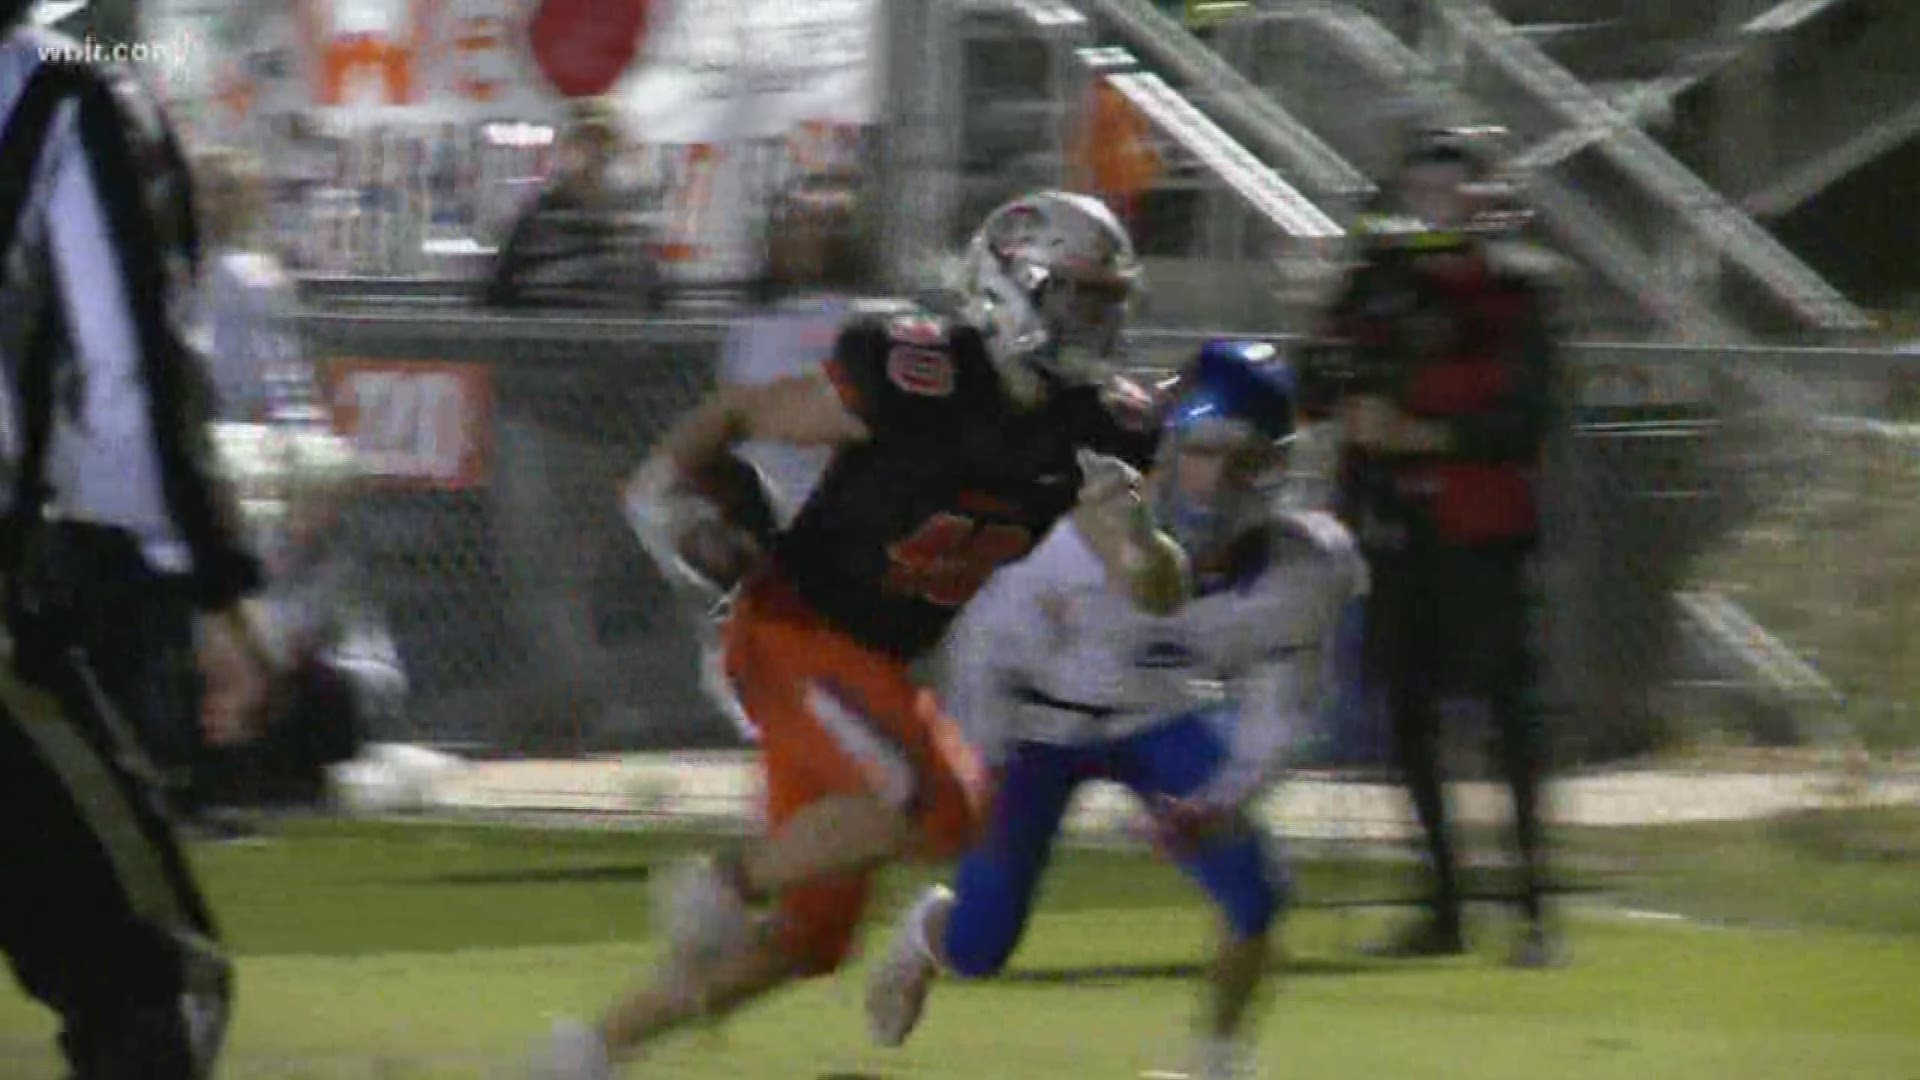 Clinton defeats Karns as the Beavers are eliminated from playoff contention.